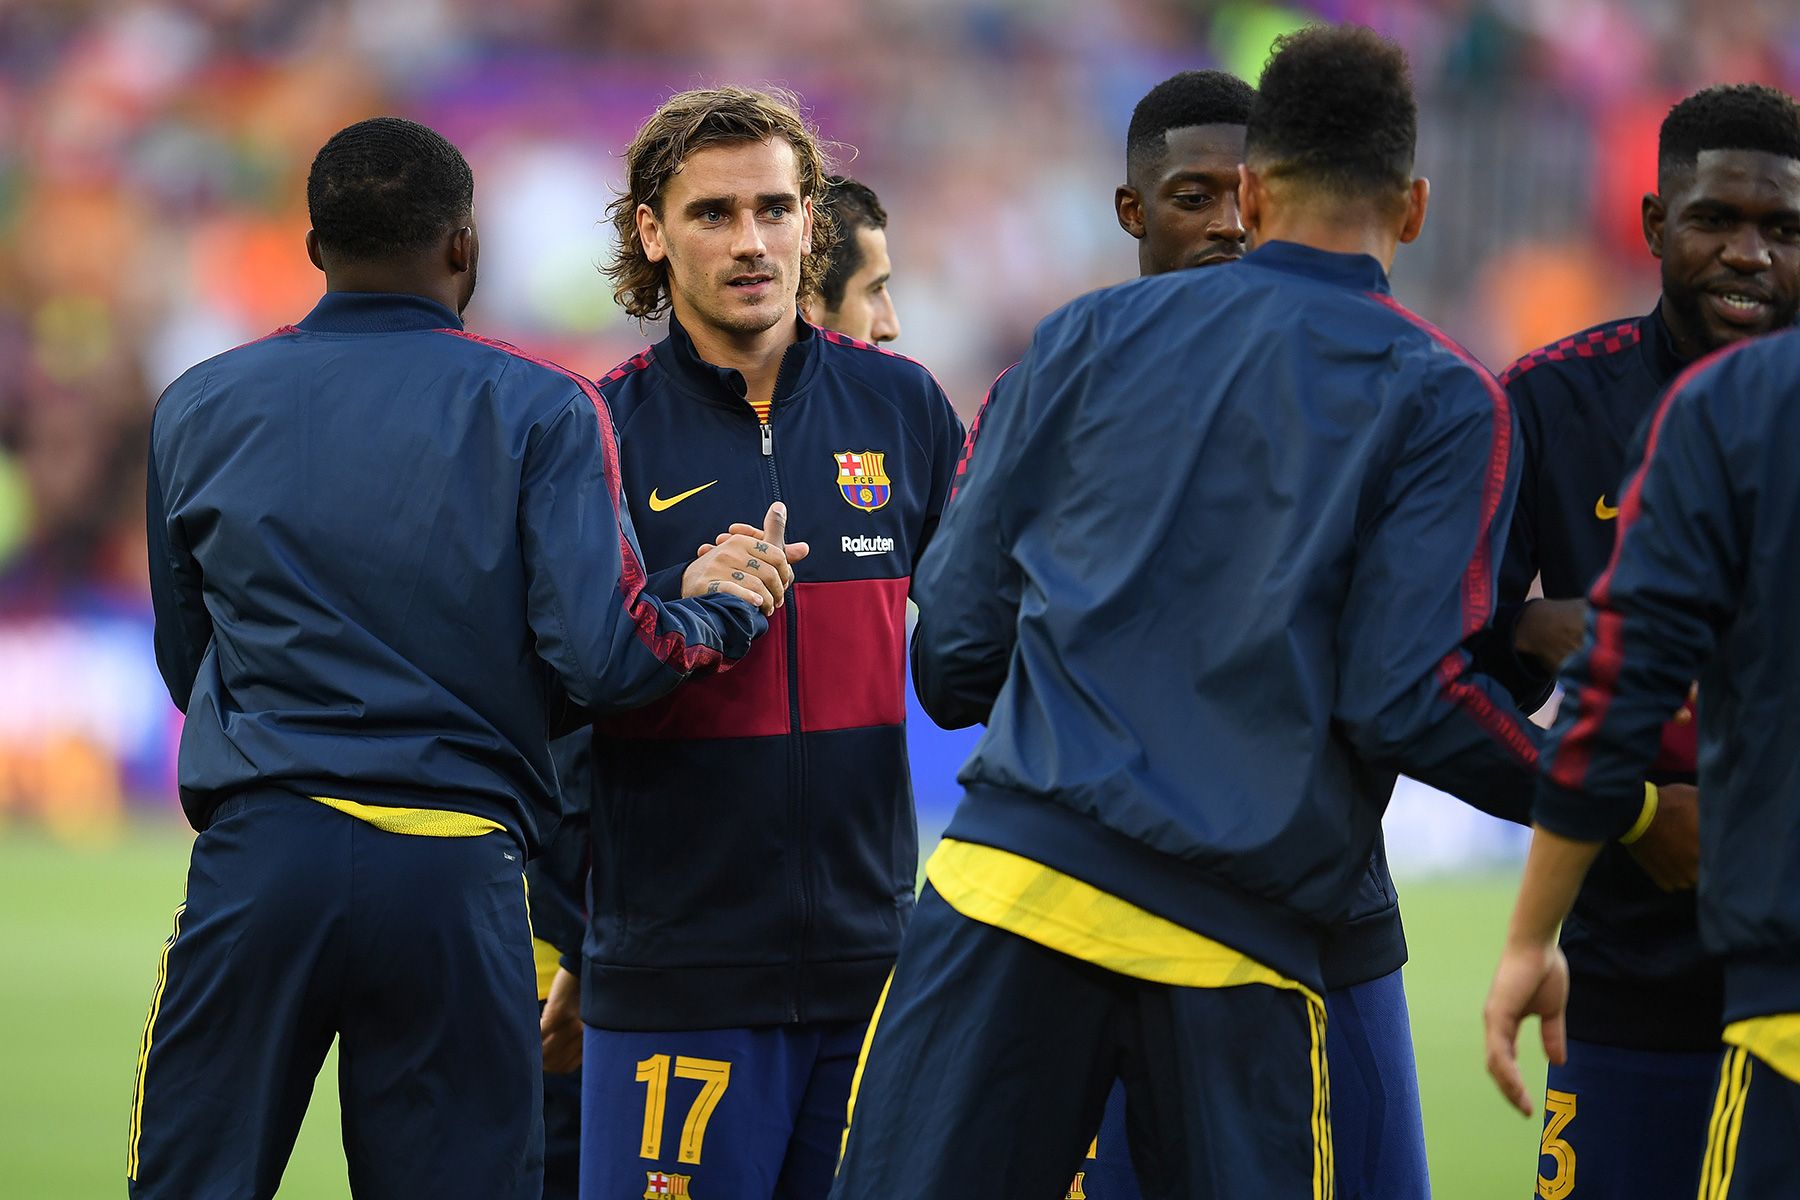 The players of Barça and Arsenal greet  before the match